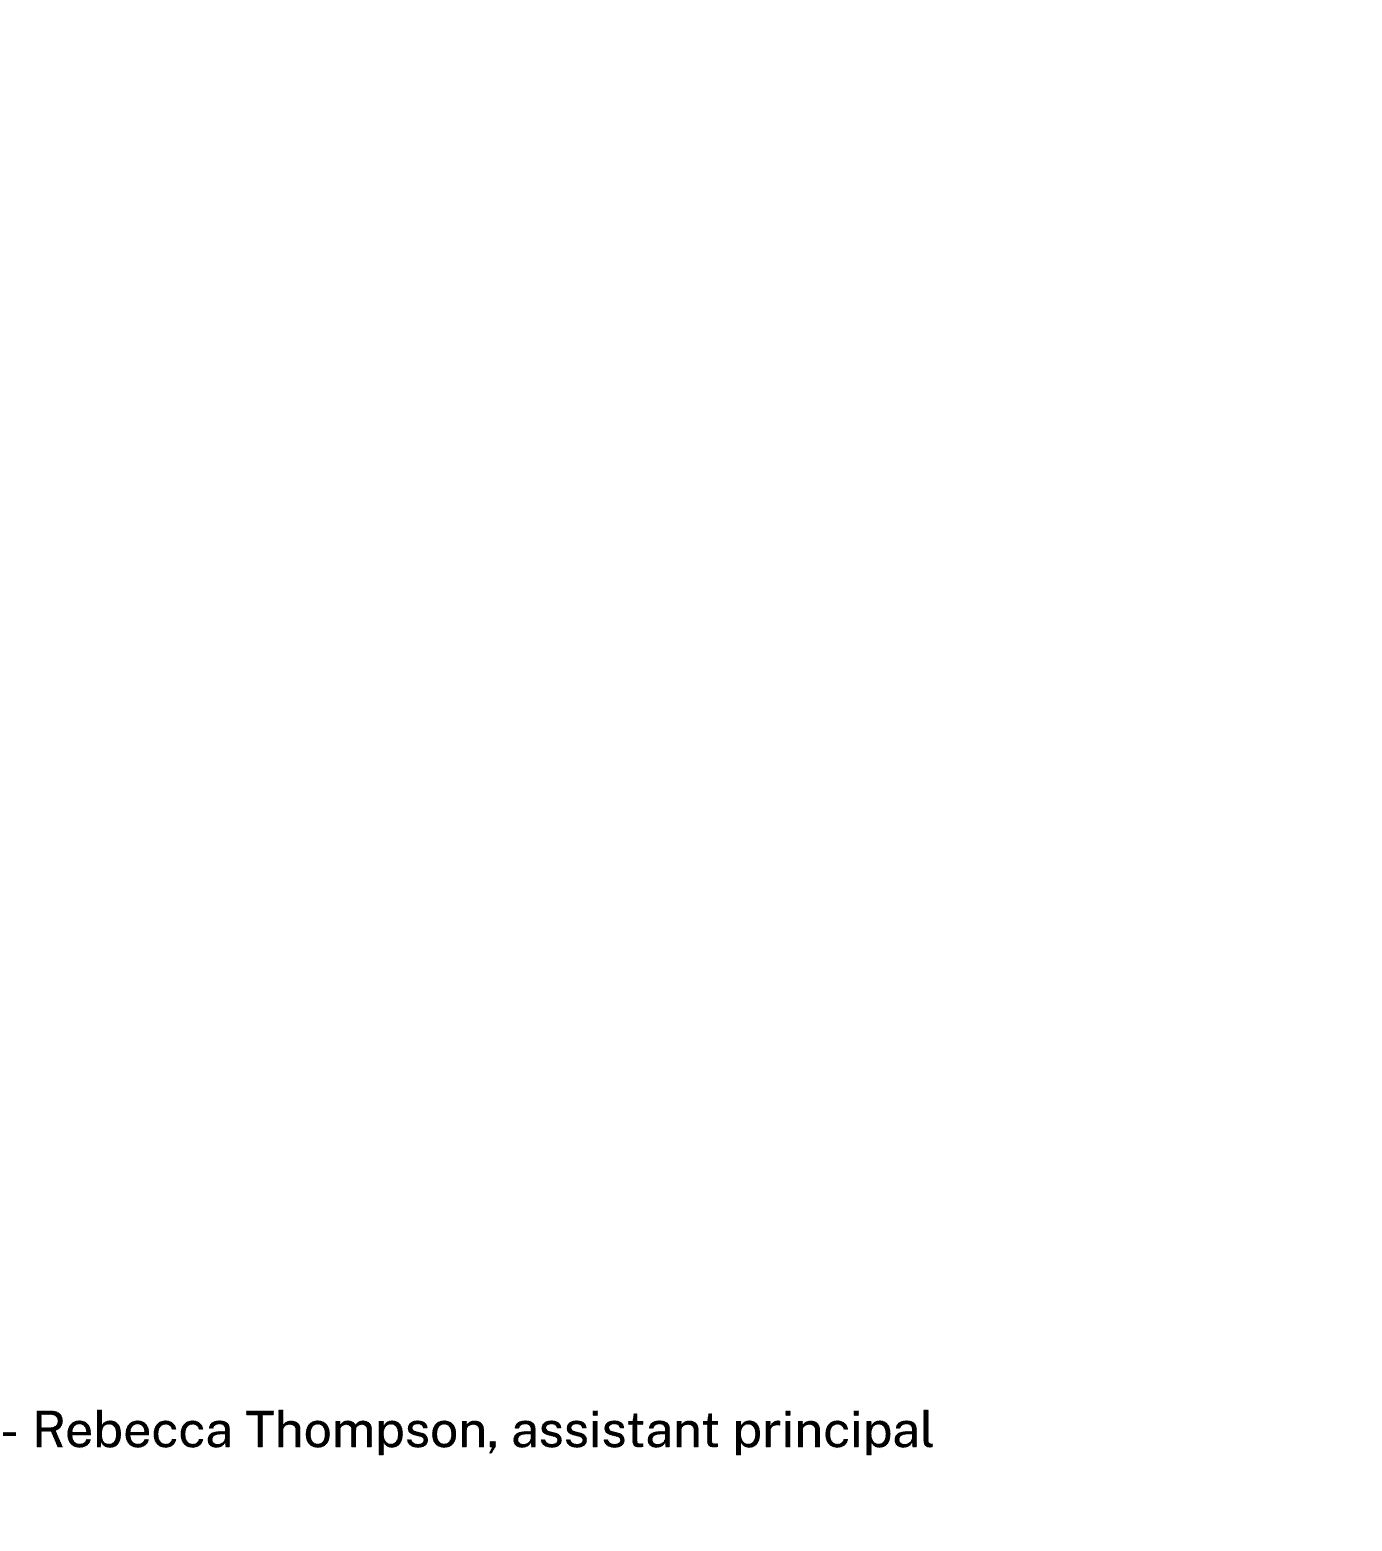 “The school previously had a very productive garden, but it hadn’t been used in five years. The grant, along with a s...